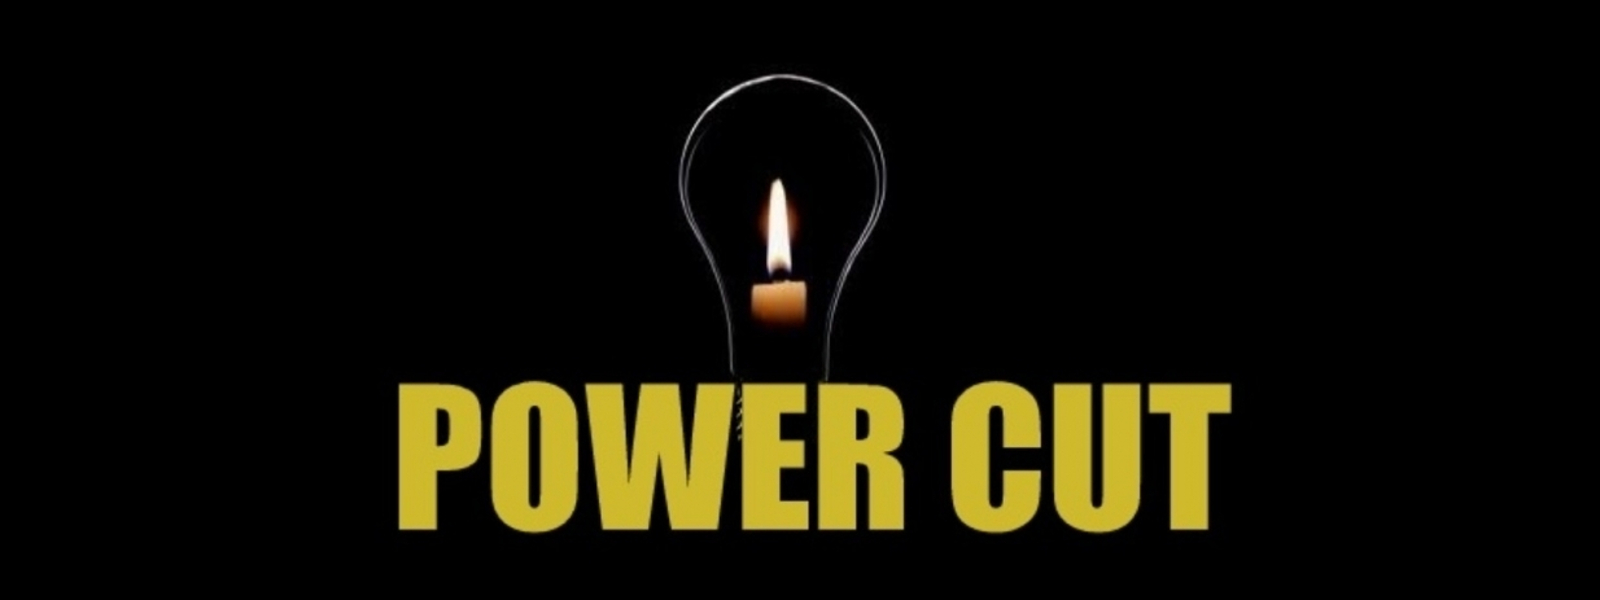 Power Cuts announced for Wednesday (23)